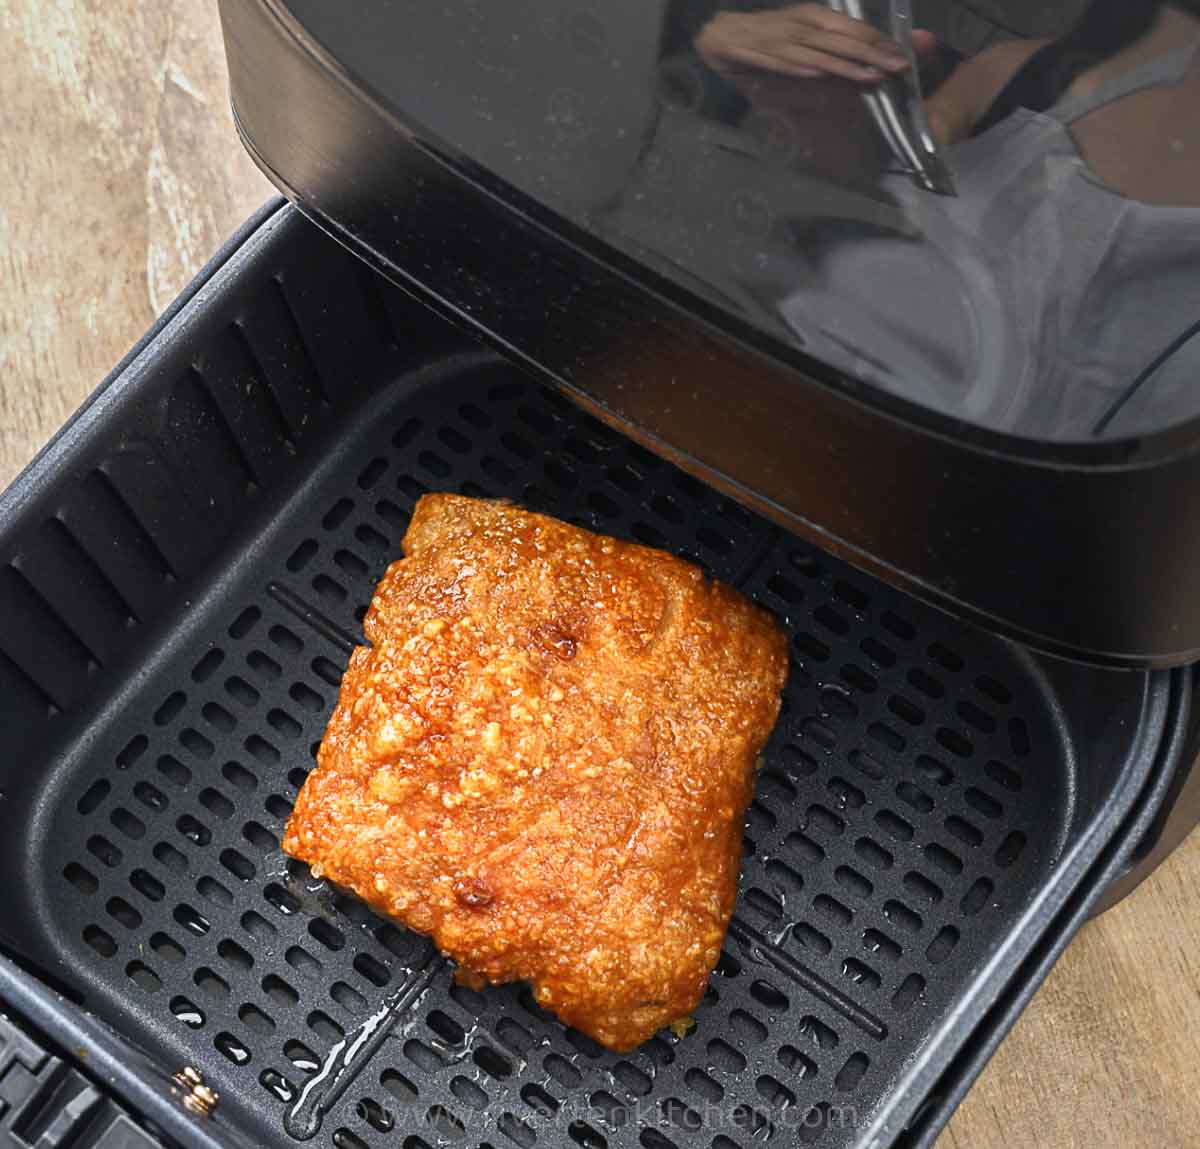 slab of lechon kawali or pork belly cooked in an air-fryer